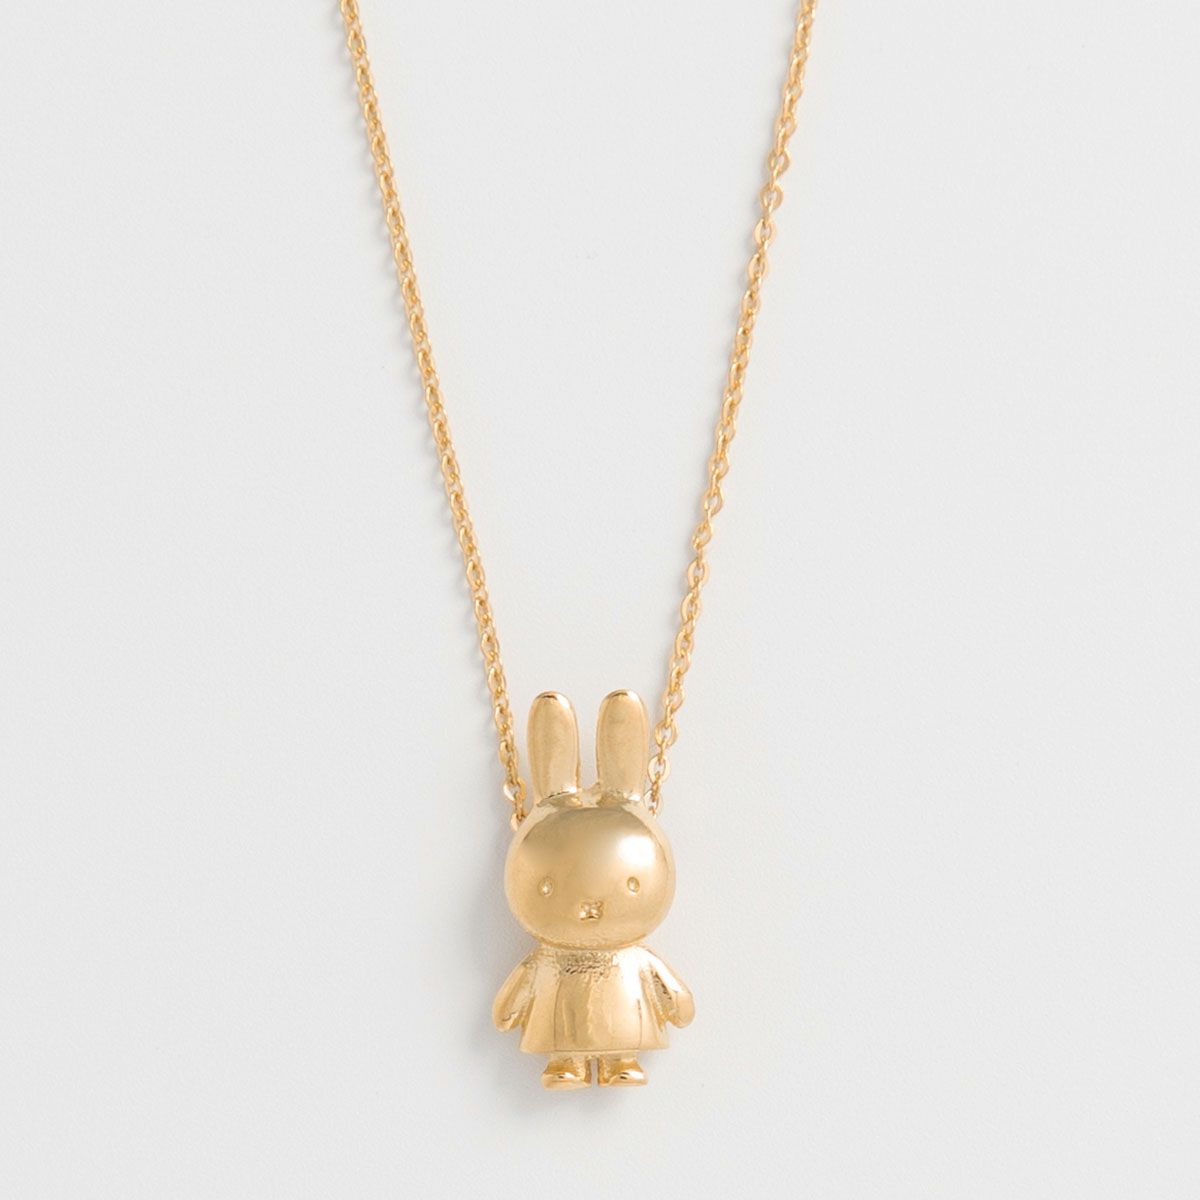 Miffy Body Charm Necklace 18ct Gold Vermeil